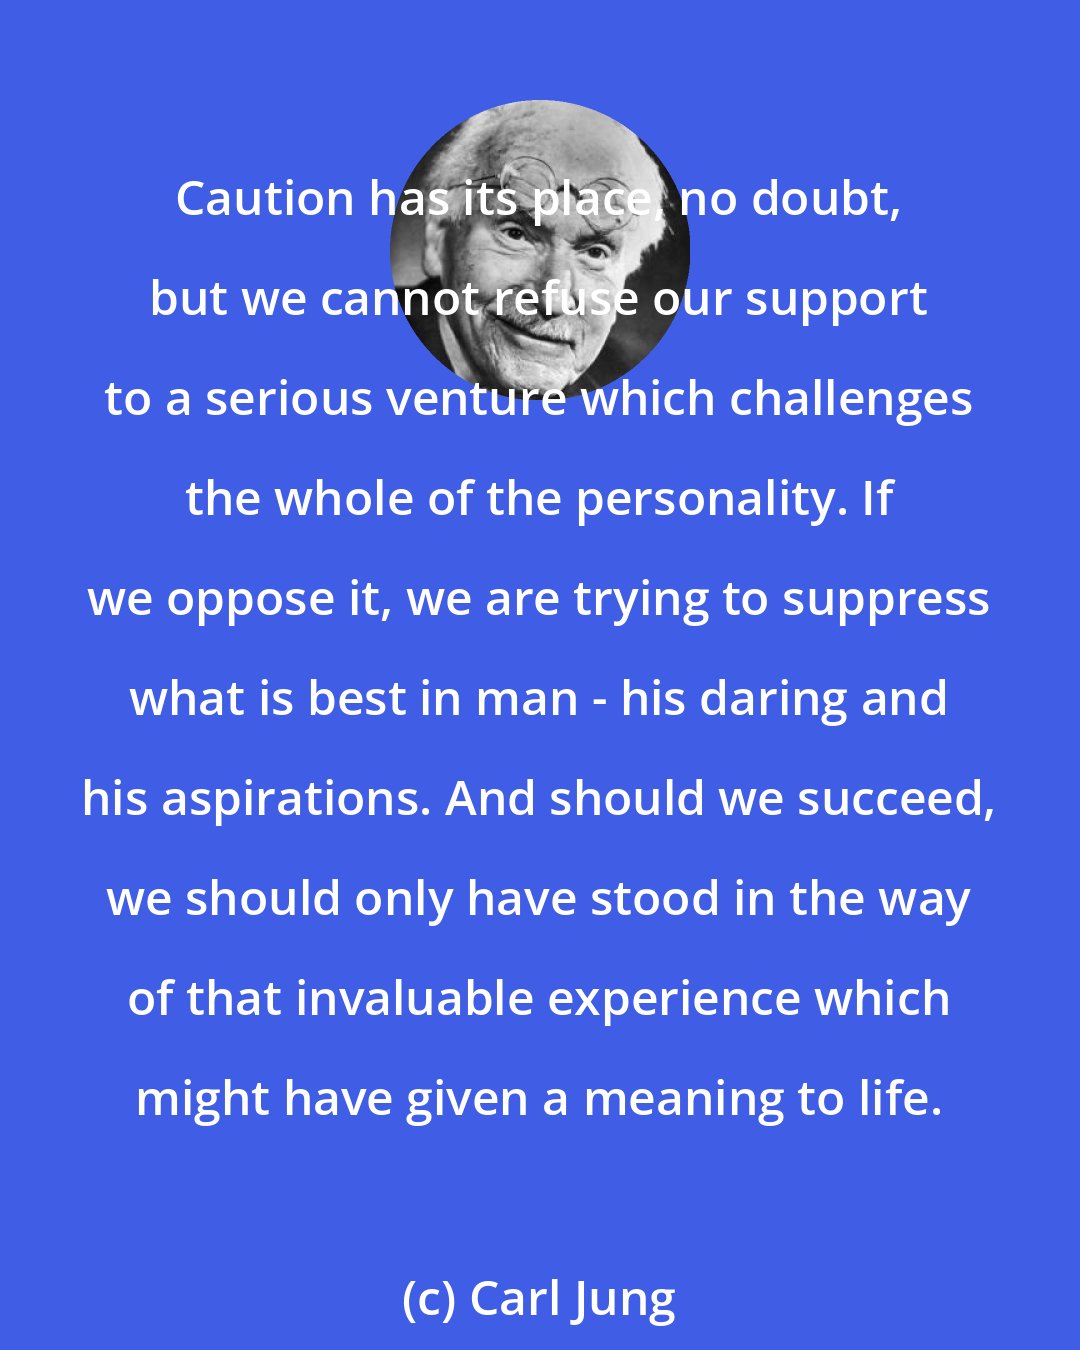 Carl Jung: Caution has its place, no doubt, but we cannot refuse our support to a serious venture which challenges the whole of the personality. If we oppose it, we are trying to suppress what is best in man - his daring and his aspirations. And should we succeed, we should only have stood in the way of that invaluable experience which might have given a meaning to life.